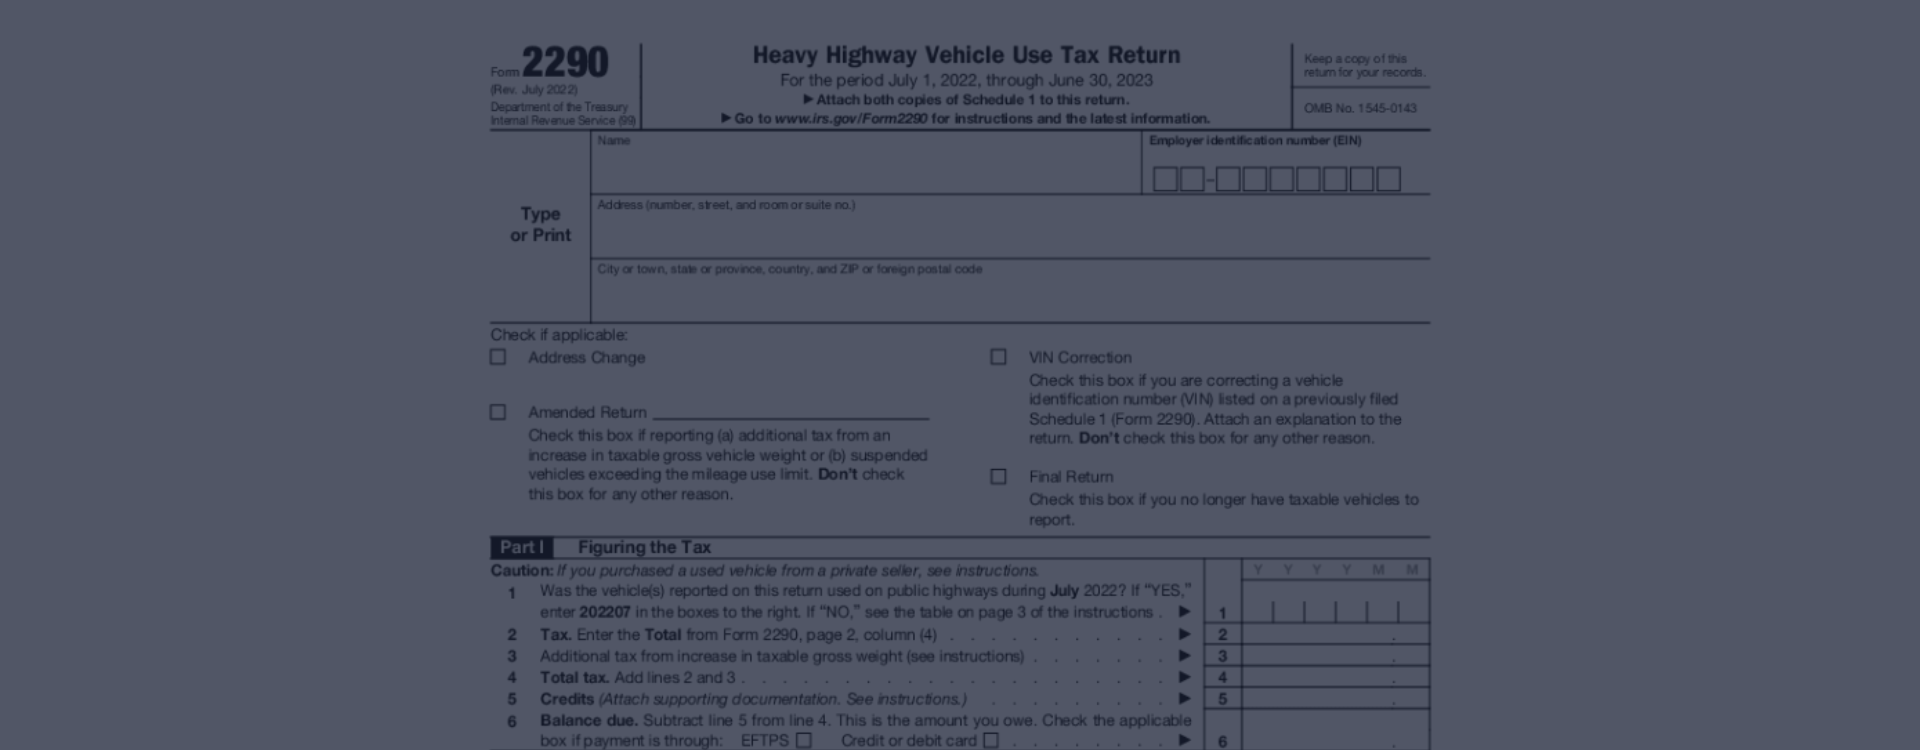 Irs Form 2290 Printable 2022 2290 Tax Form Online Instructions And Pdf To Print Or E File 5603